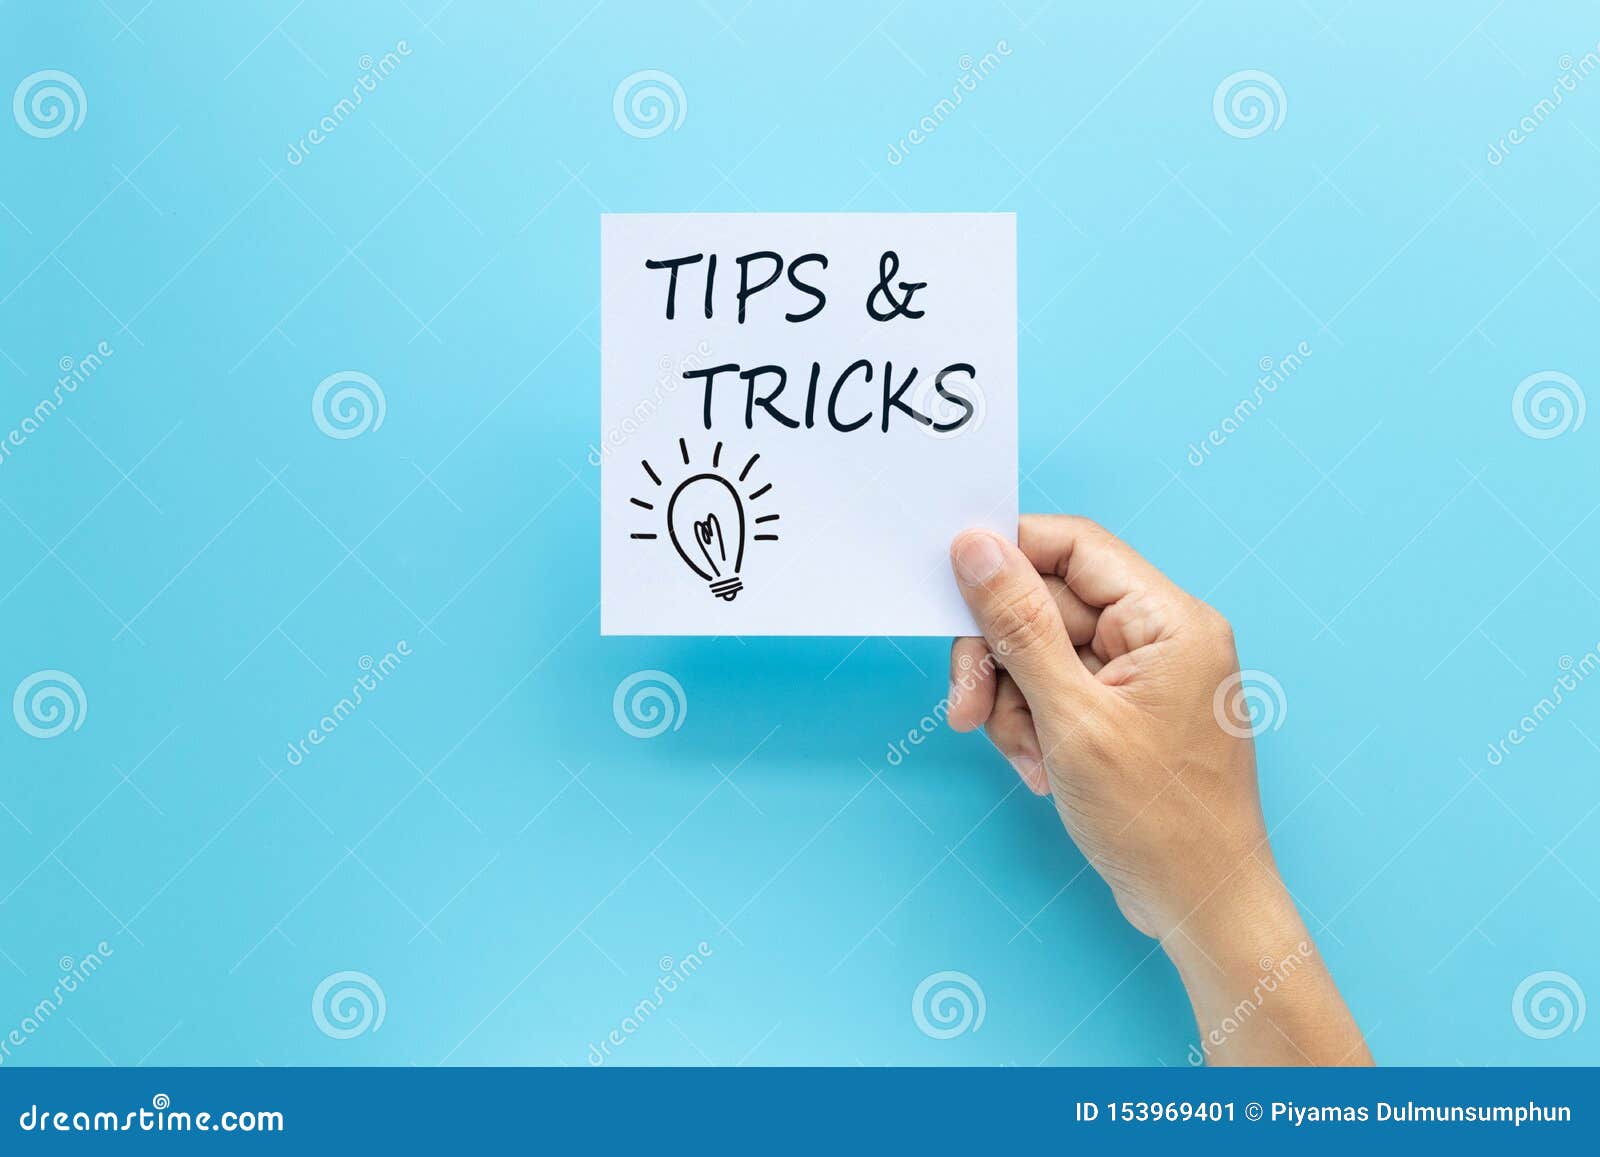 text tips and tricks on white paper in hand  on blue background.